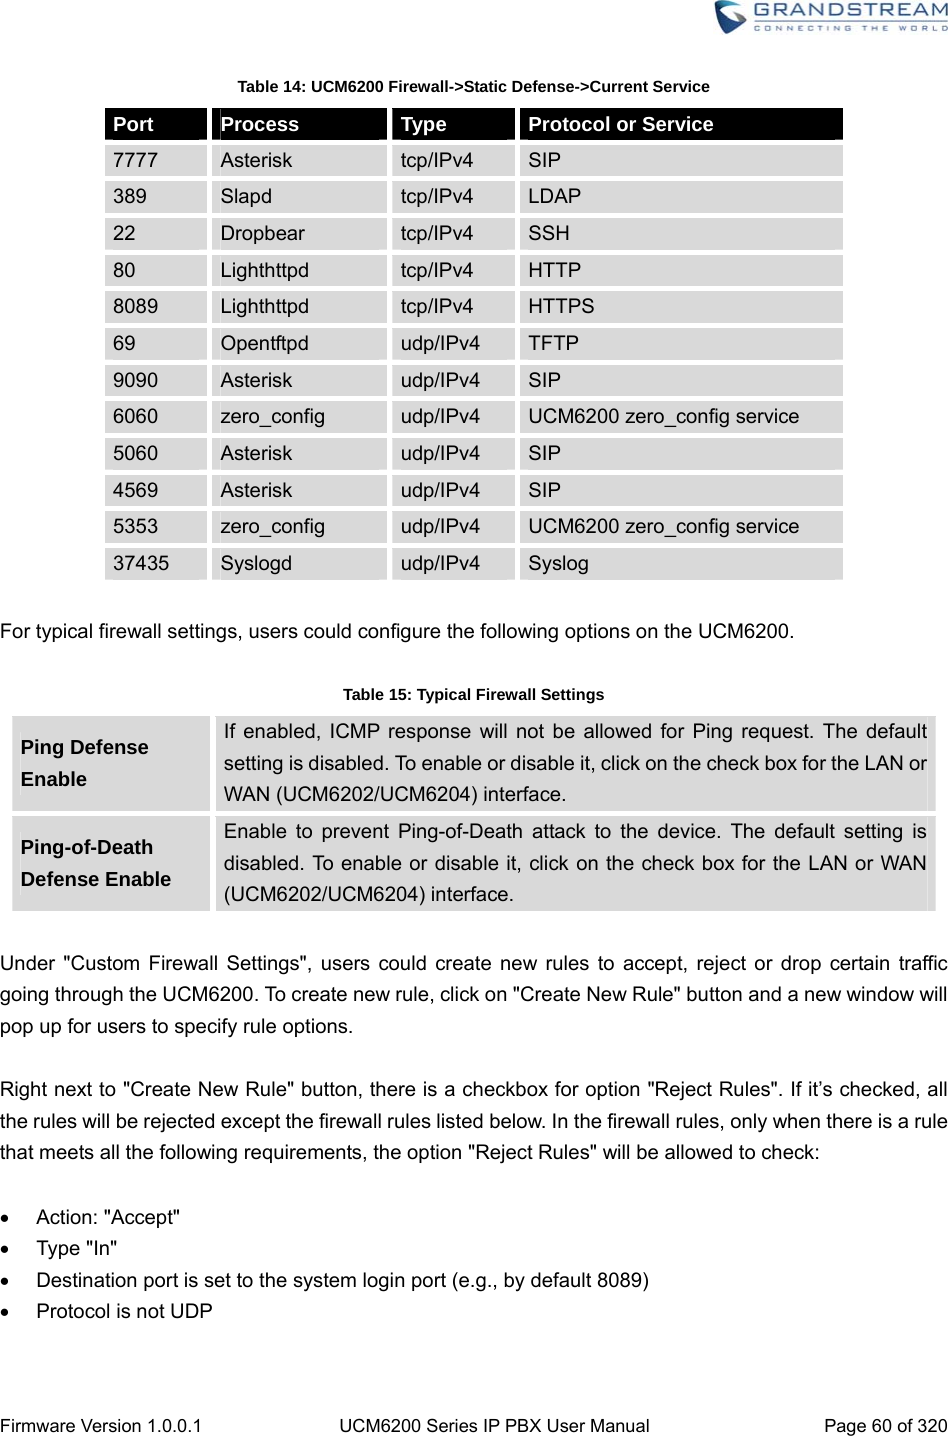  Firmware Version 1.0.0.1  UCM6200 Series IP PBX User Manual  Page 60 of 320 Table 14: UCM6200 Firewall-&gt;Static Defense-&gt;Current Service Port  Process  Type  Protocol or Service 7777  Asterisk  tcp/IPv4  SIP 389  Slapd  tcp/IPv4  LDAP 22  Dropbear  tcp/IPv4  SSH 80  Lighthttpd  tcp/IPv4  HTTP 8089  Lighthttpd  tcp/IPv4  HTTPS 69  Opentftpd  udp/IPv4  TFTP 9090  Asterisk  udp/IPv4  SIP 6060  zero_config  udp/IPv4  UCM6200 zero_config service 5060  Asterisk  udp/IPv4  SIP 4569  Asterisk  udp/IPv4  SIP 5353  zero_config  udp/IPv4  UCM6200 zero_config service 37435  Syslogd  udp/IPv4  Syslog  For typical firewall settings, users could configure the following options on the UCM6200.  Table 15: Typical Firewall Settings Ping Defense Enable If enabled, ICMP response will not be allowed for Ping request. The default setting is disabled. To enable or disable it, click on the check box for the LAN or WAN (UCM6202/UCM6204) interface. Ping-of-Death Defense Enable Enable to prevent Ping-of-Death attack to the device. The default setting is disabled. To enable or disable it, click on the check box for the LAN or WAN (UCM6202/UCM6204) interface.  Under &quot;Custom Firewall Settings&quot;, users could create new rules to accept, reject or drop certain traffic going through the UCM6200. To create new rule, click on &quot;Create New Rule&quot; button and a new window will pop up for users to specify rule options.  Right next to &quot;Create New Rule&quot; button, there is a checkbox for option &quot;Reject Rules&quot;. If it’s checked, all the rules will be rejected except the firewall rules listed below. In the firewall rules, only when there is a rule that meets all the following requirements, the option &quot;Reject Rules&quot; will be allowed to check:   Action: &quot;Accept&quot;  Type &quot;In&quot;   Destination port is set to the system login port (e.g., by default 8089)   Protocol is not UDP  